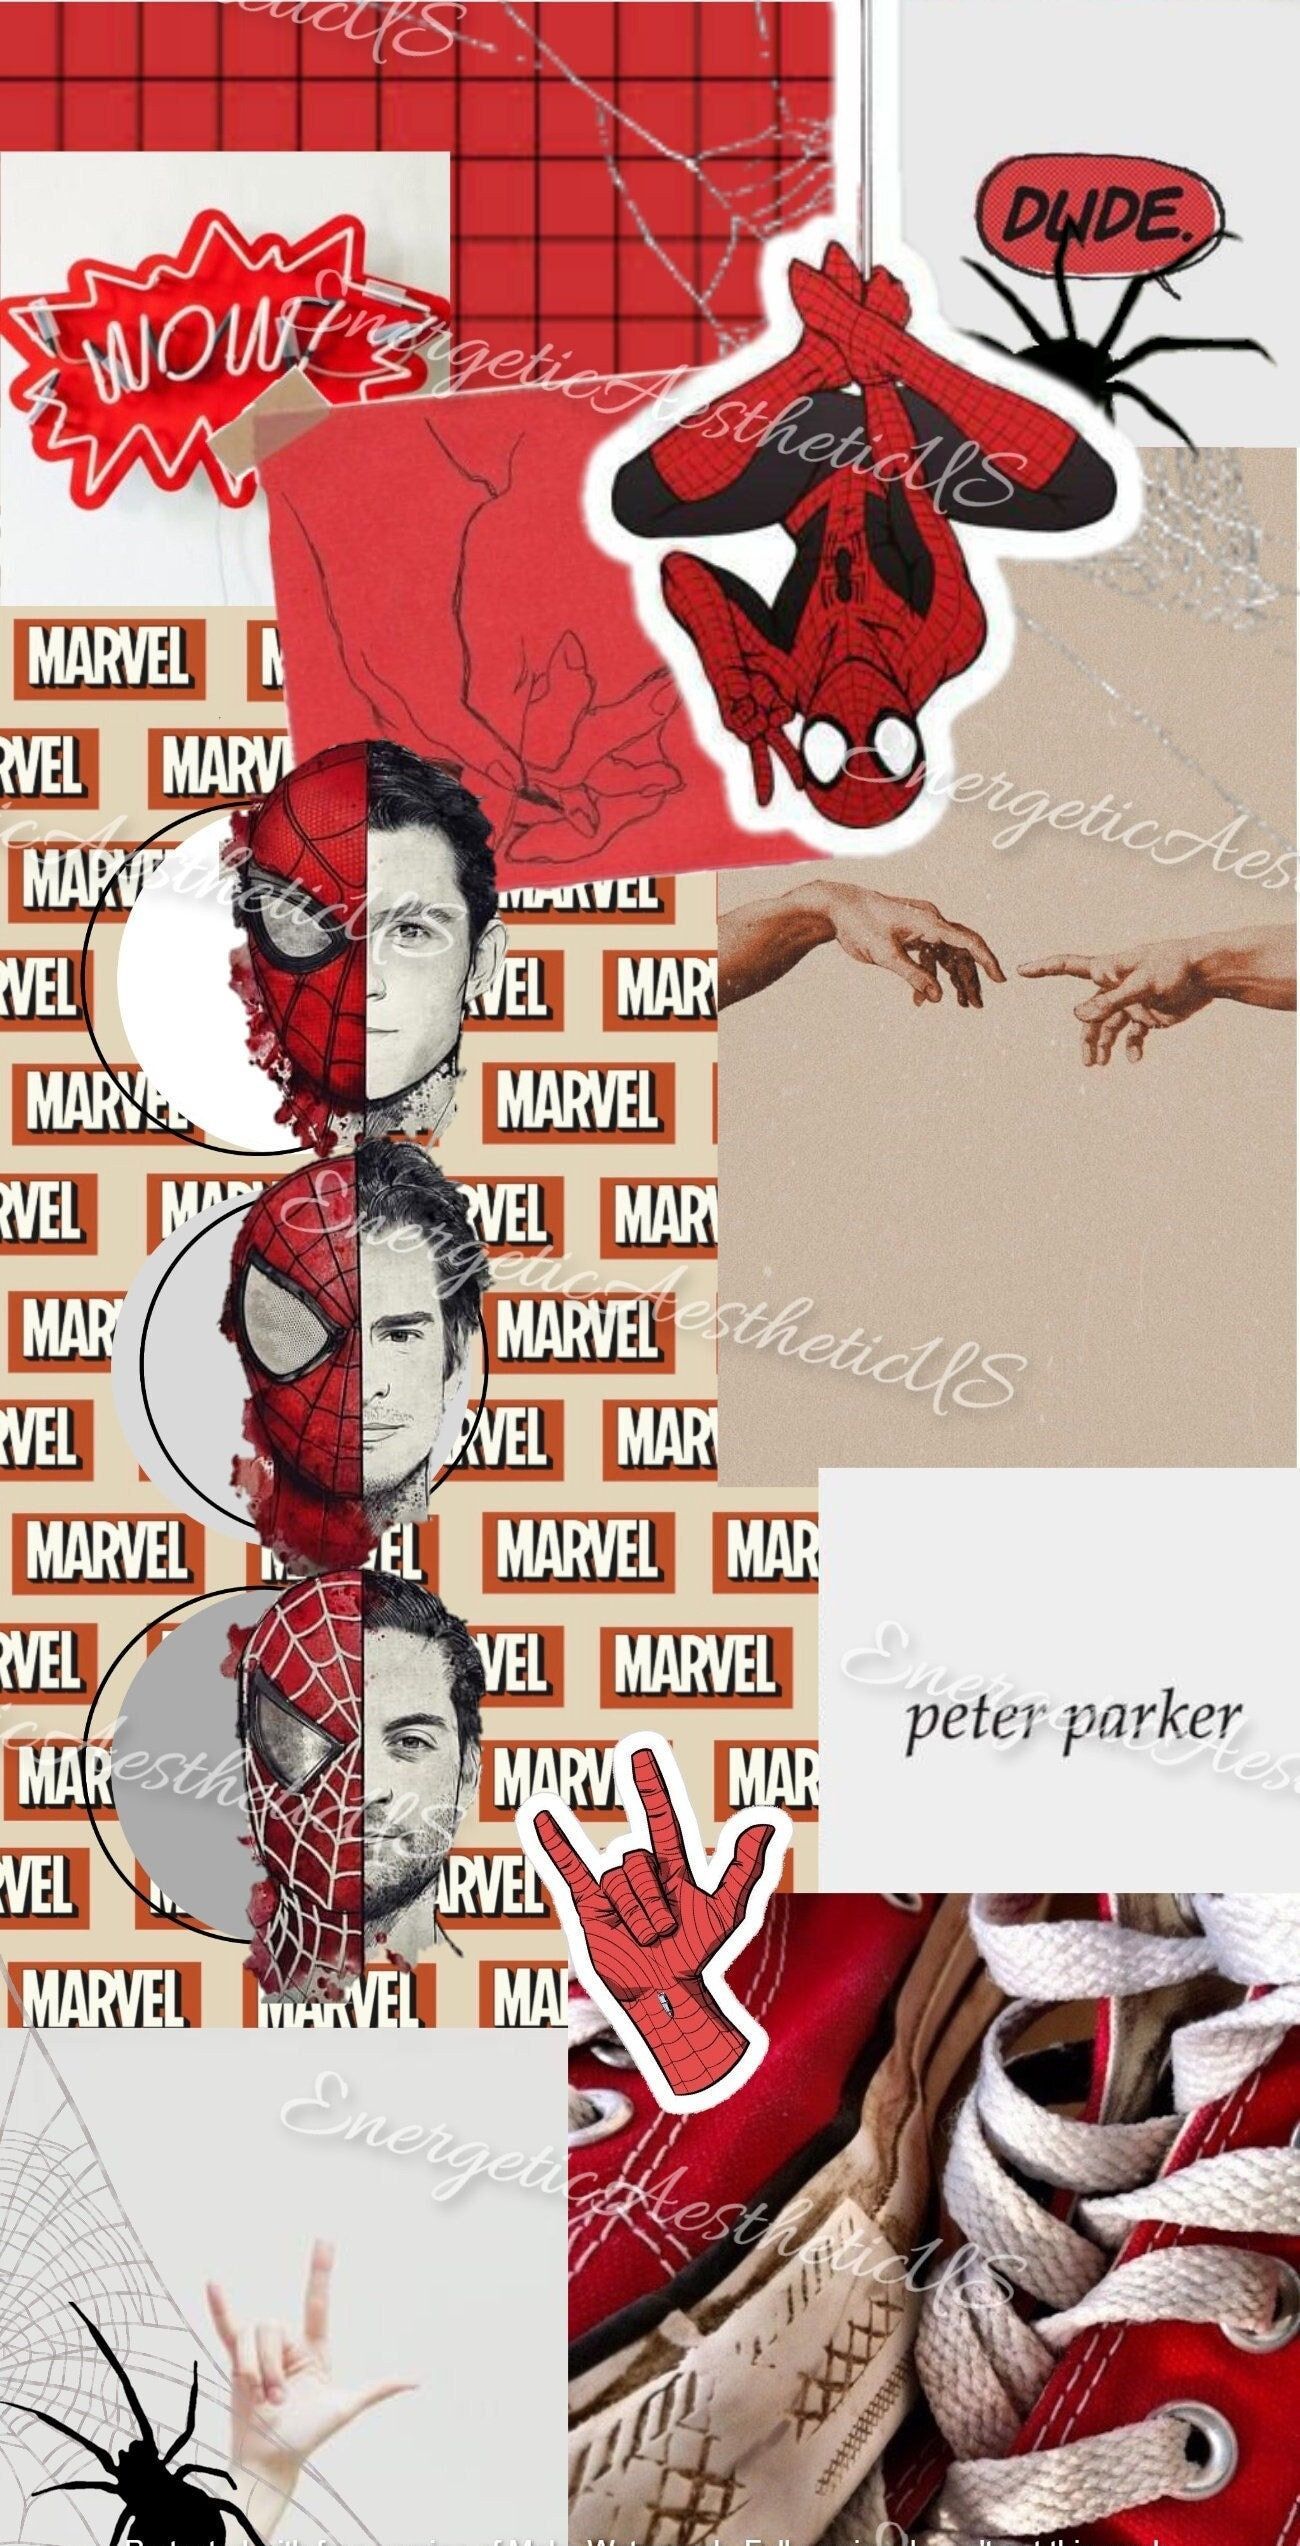 Spiderman Aesthetic wallpaper by me! Credit to the rightful owners of the pictures used. - Andrew Garfield